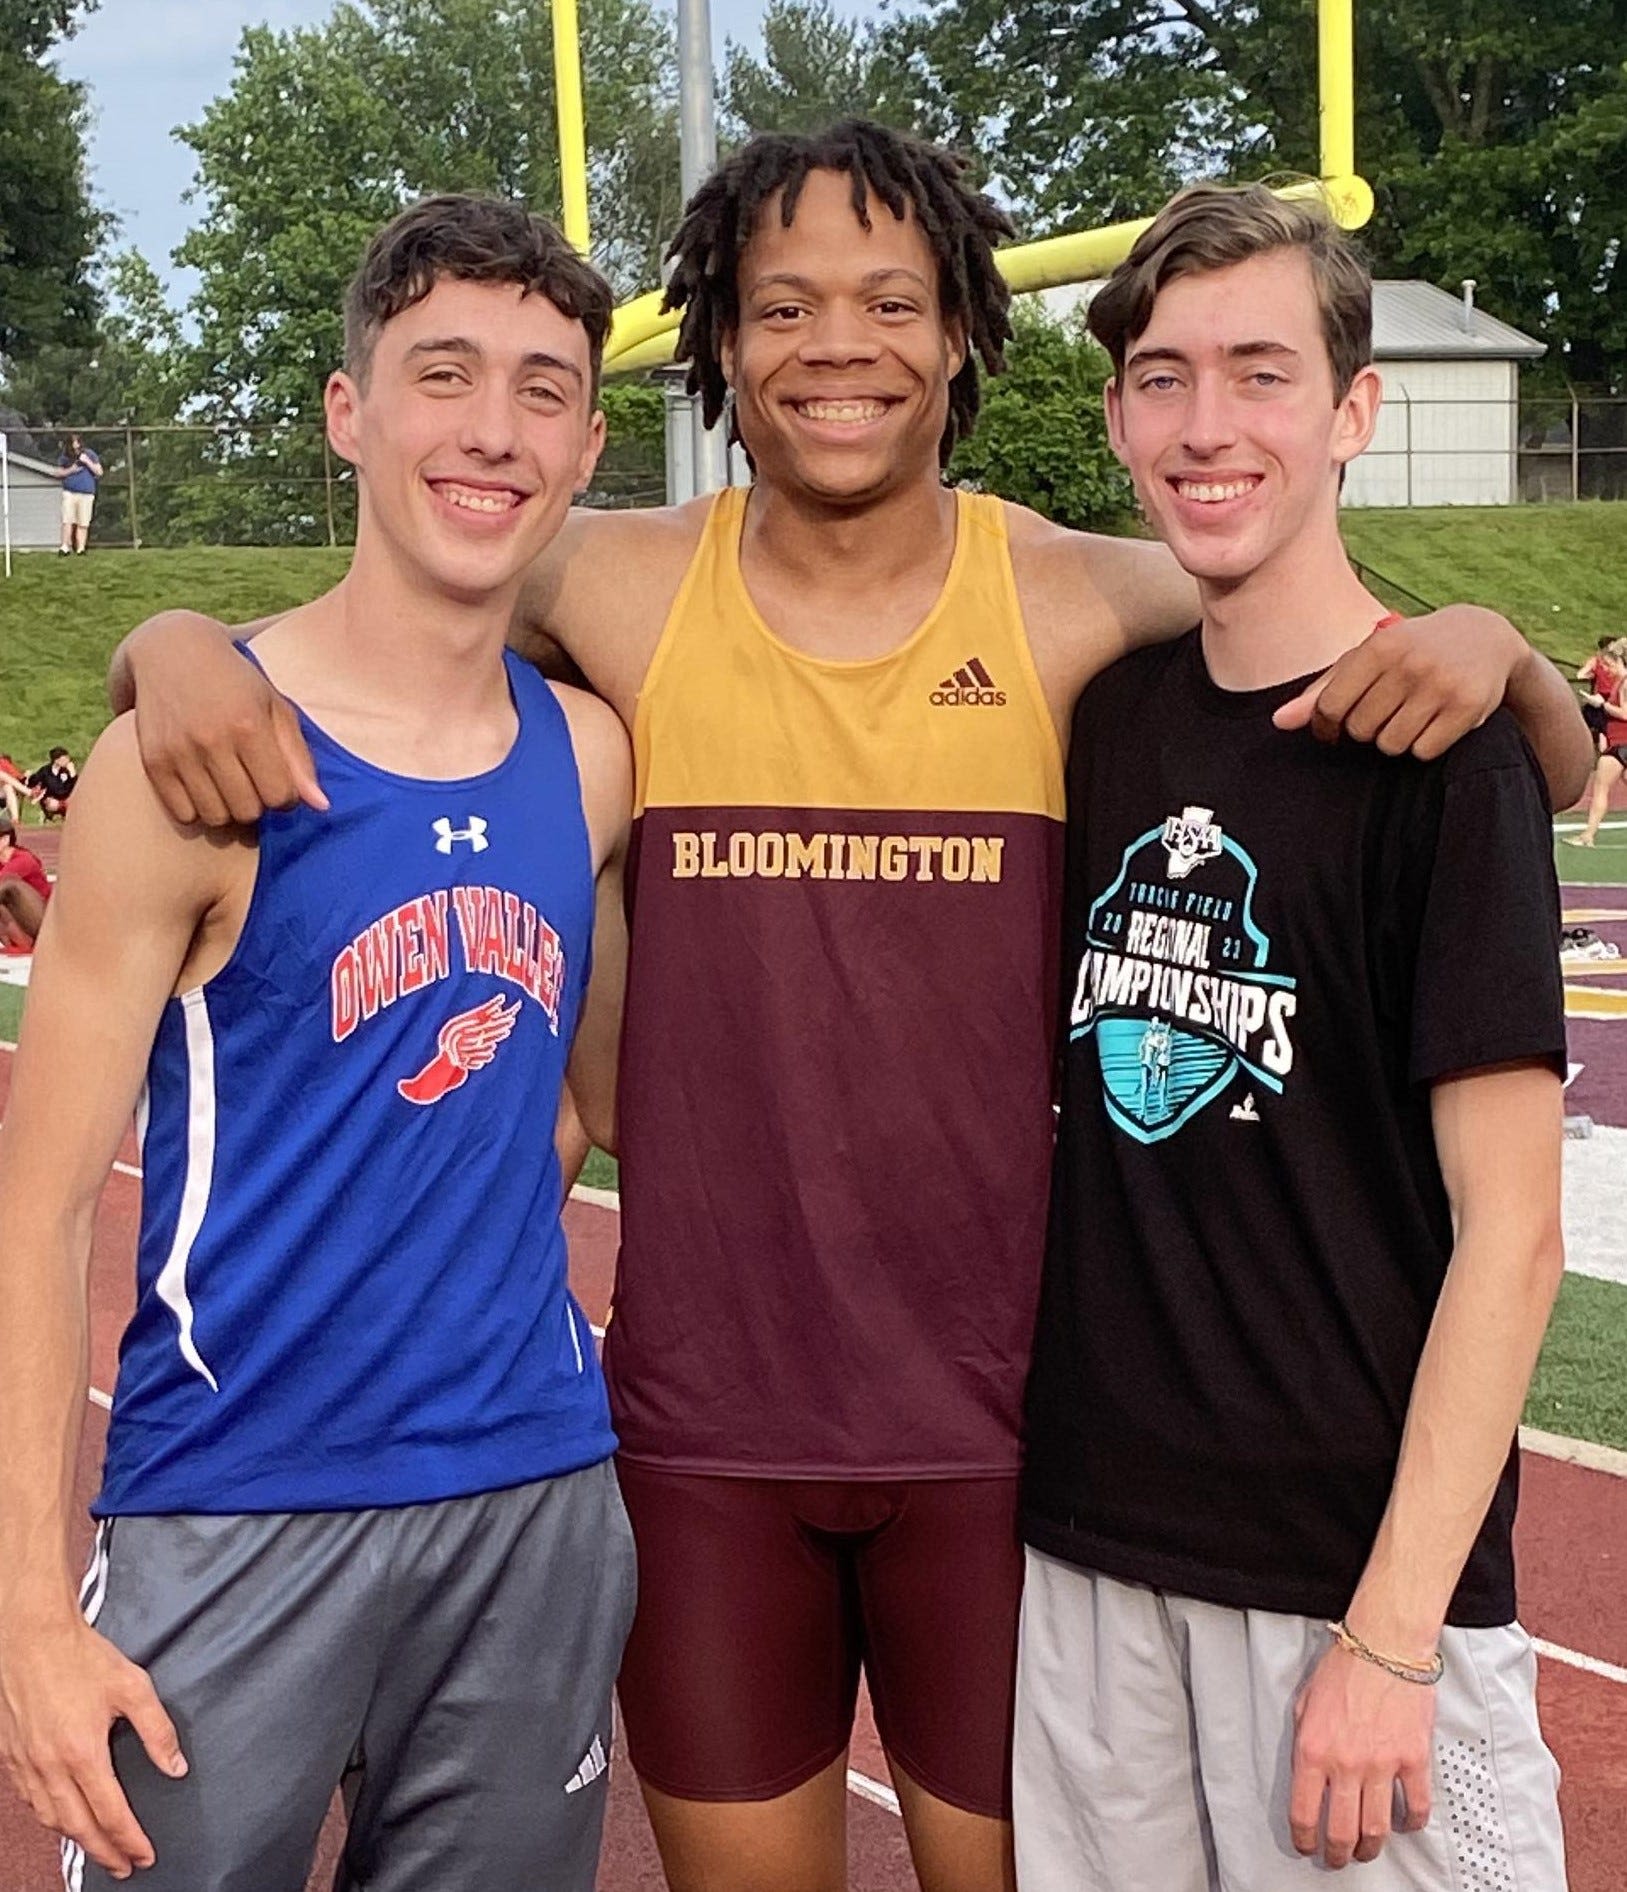 3 for the show: North, OV, BNL high jumpers work together to make IHSAA boys state finals